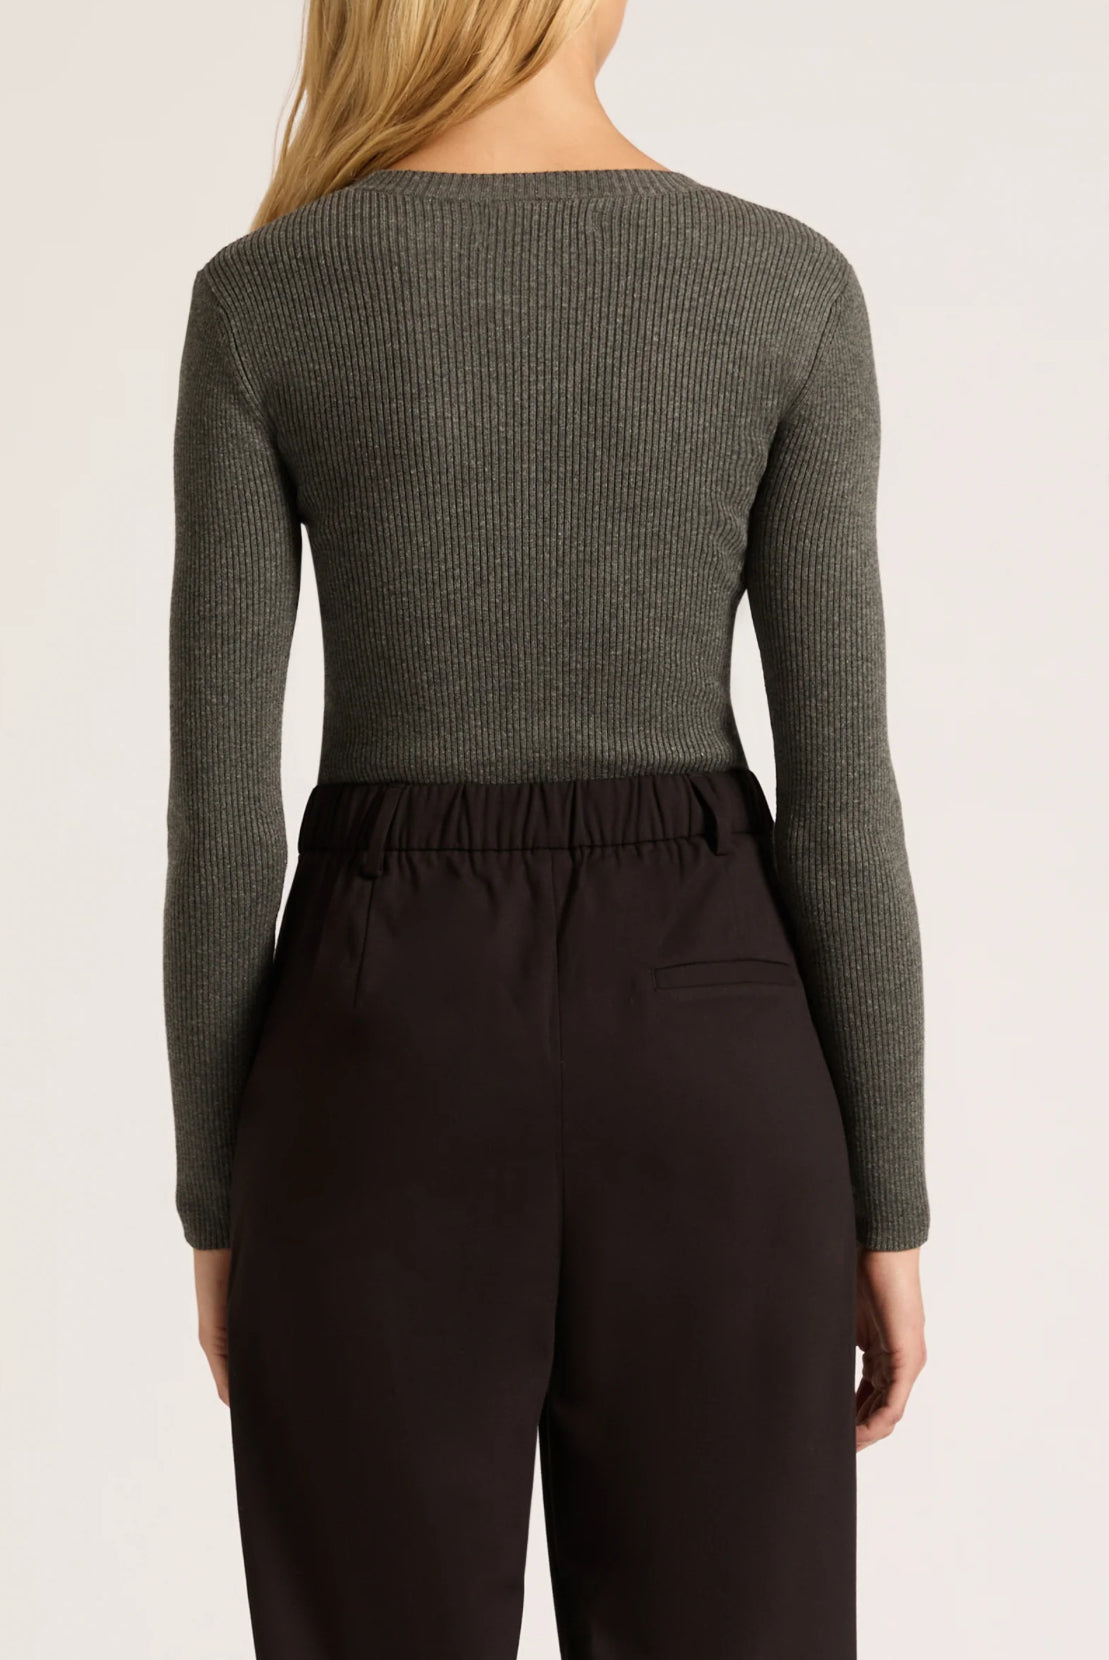 Nude Lucy Classic LS Knit in Charcoal